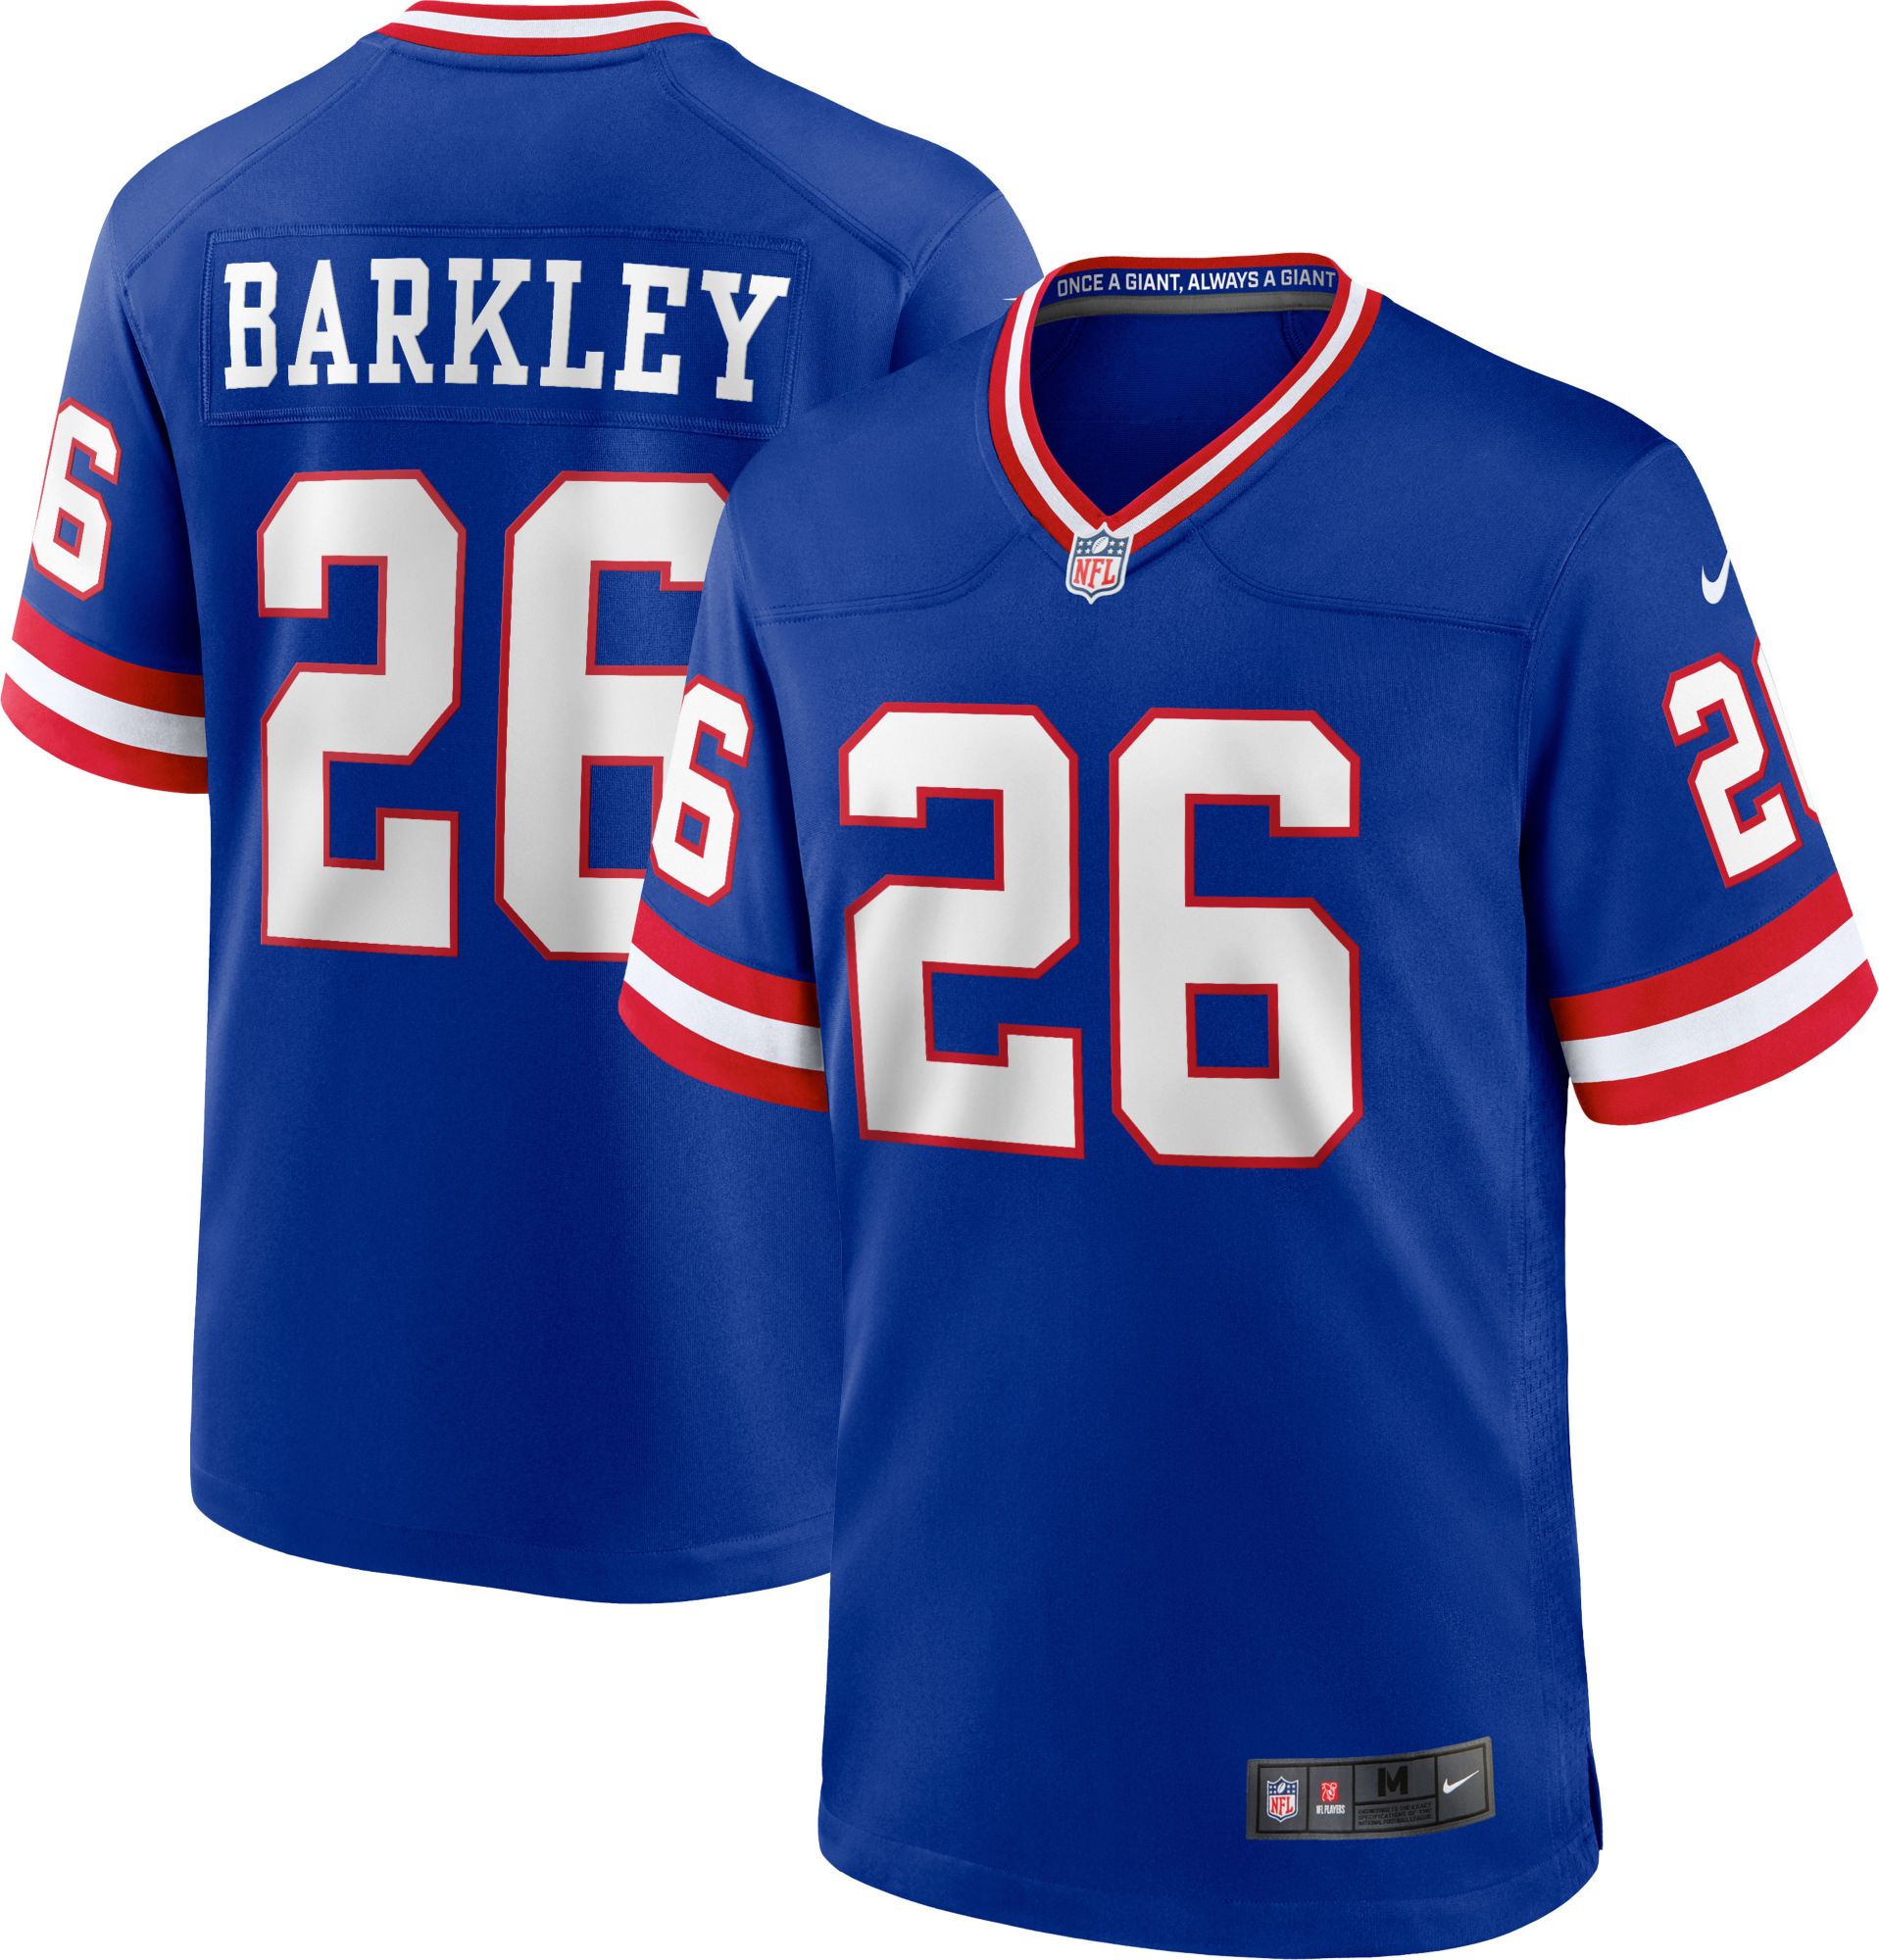 Giants Phil Simms classic jersey